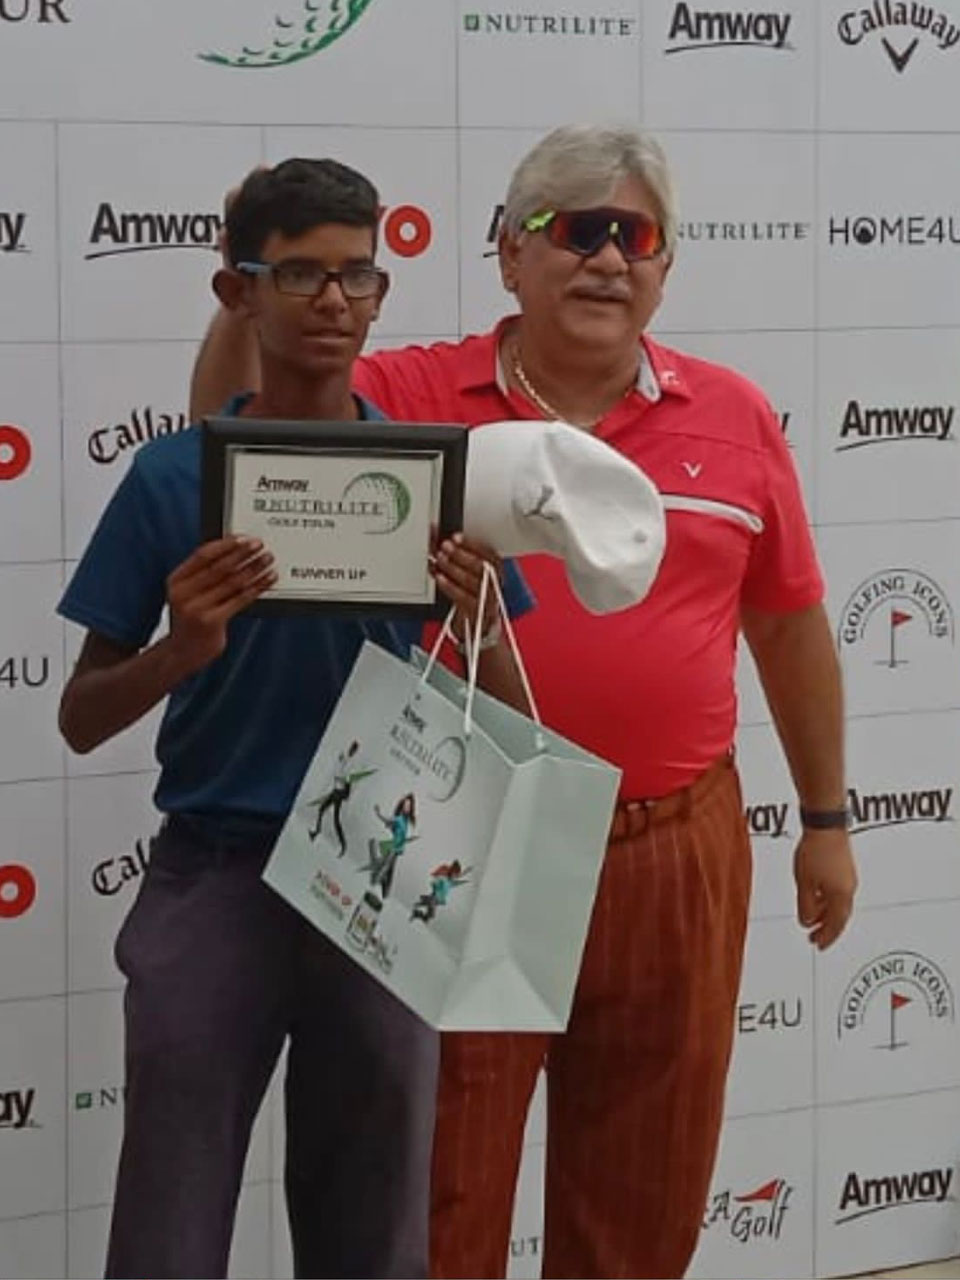 Sumith Chandra finished 2nd in the Amateur section of the Nutrilite tournament